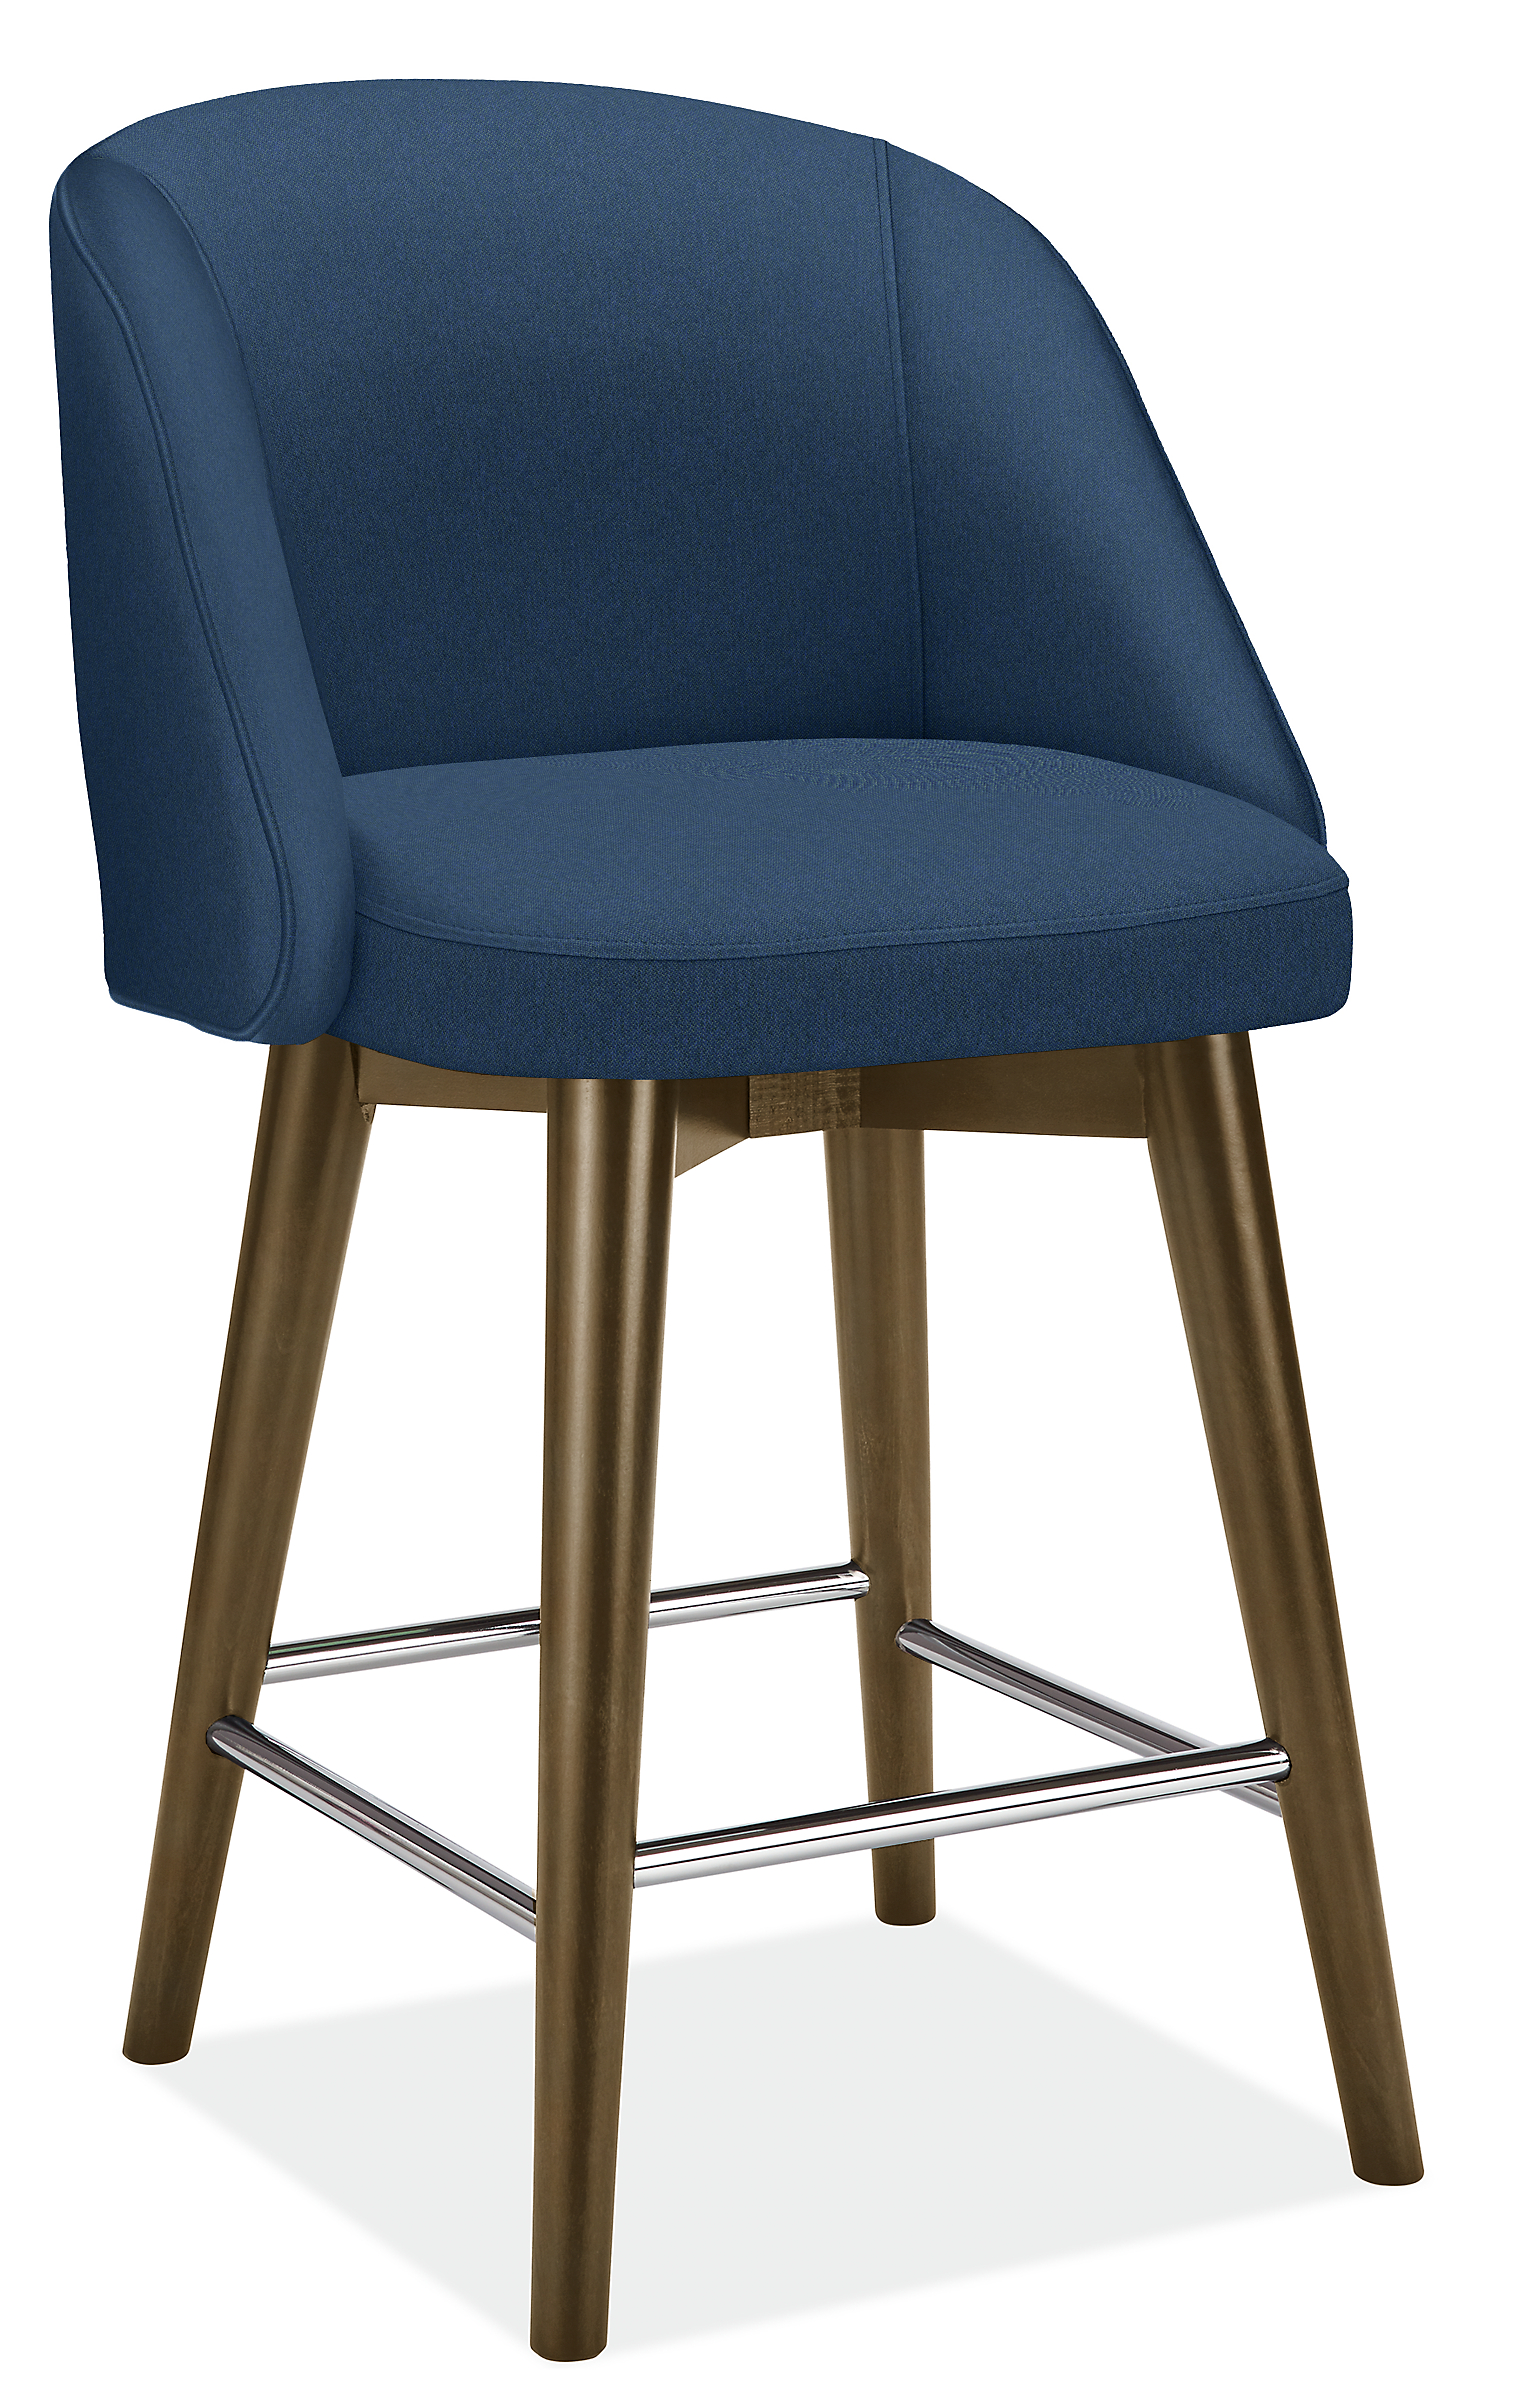 Cora Swivel Counter Stool in Flint Ink with Charcoal Legs